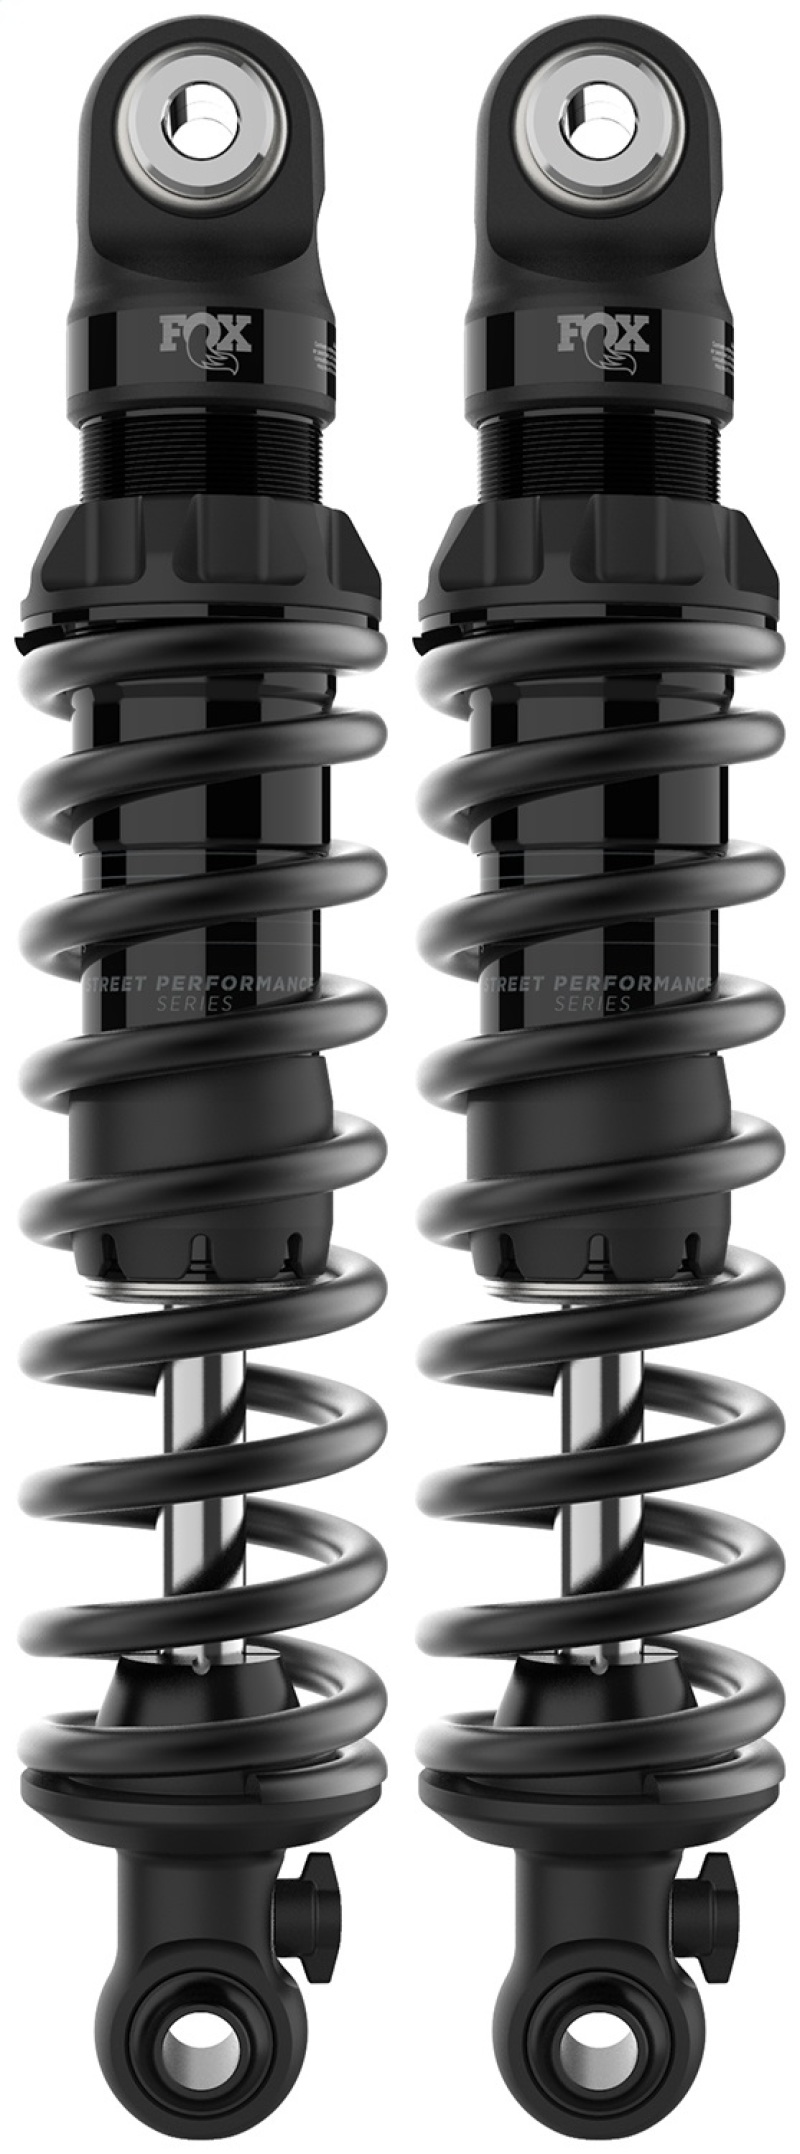 Fox Harley-Davidson AM Touring 13in Height (13.06 / 3.31) 1.459in IFP-QSR Heavy Spring - Set of 2 - 897-27-212